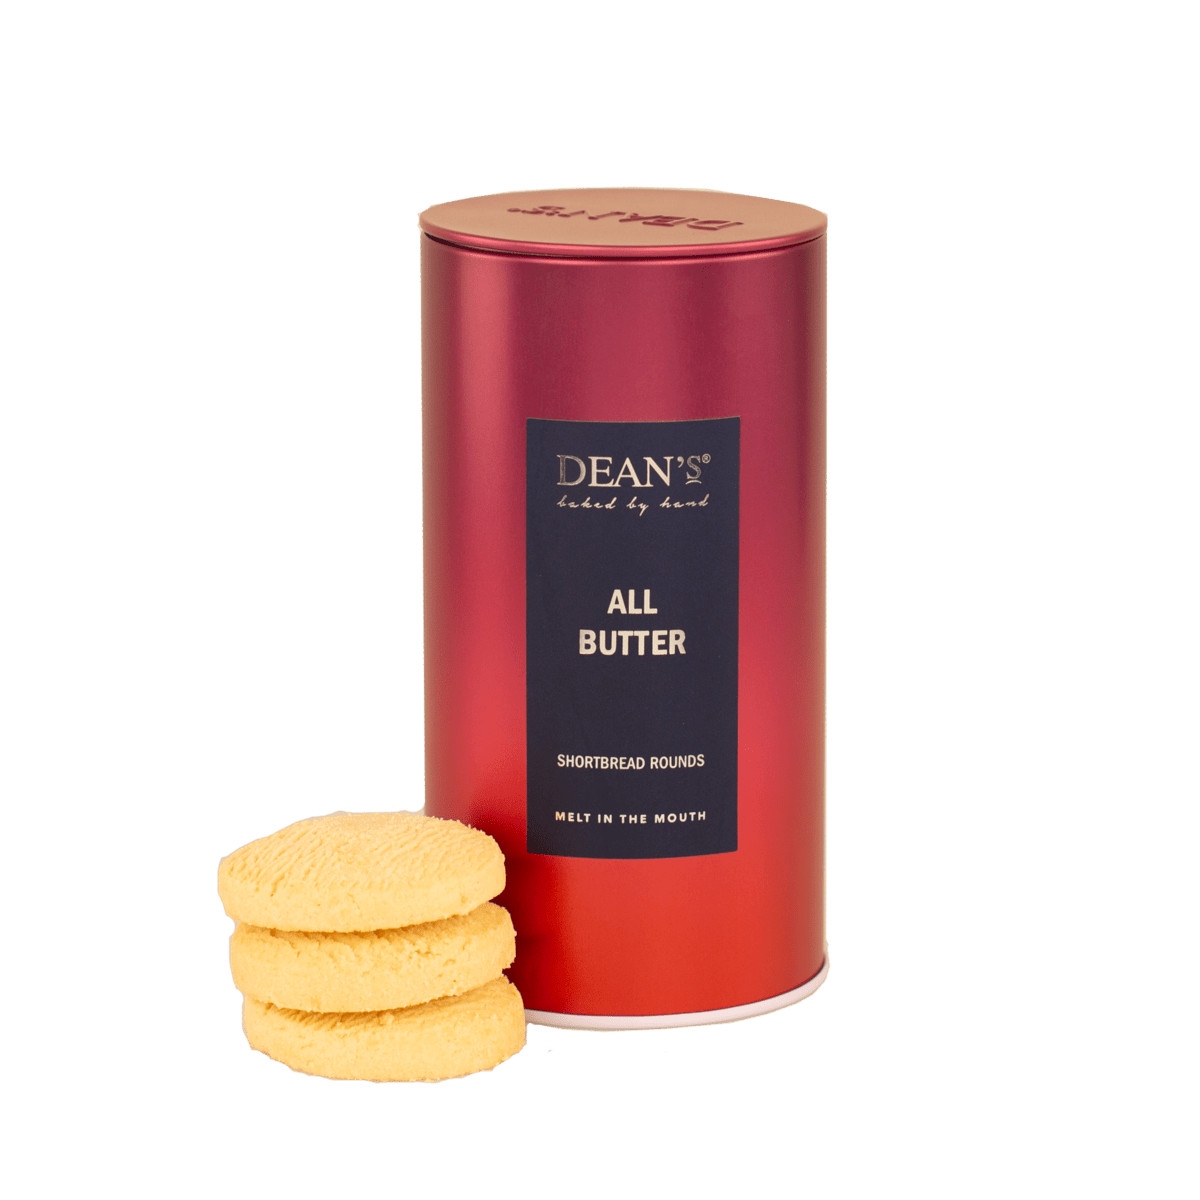 Buy the All Butter Shortbread Rounds 150g online at Dean's